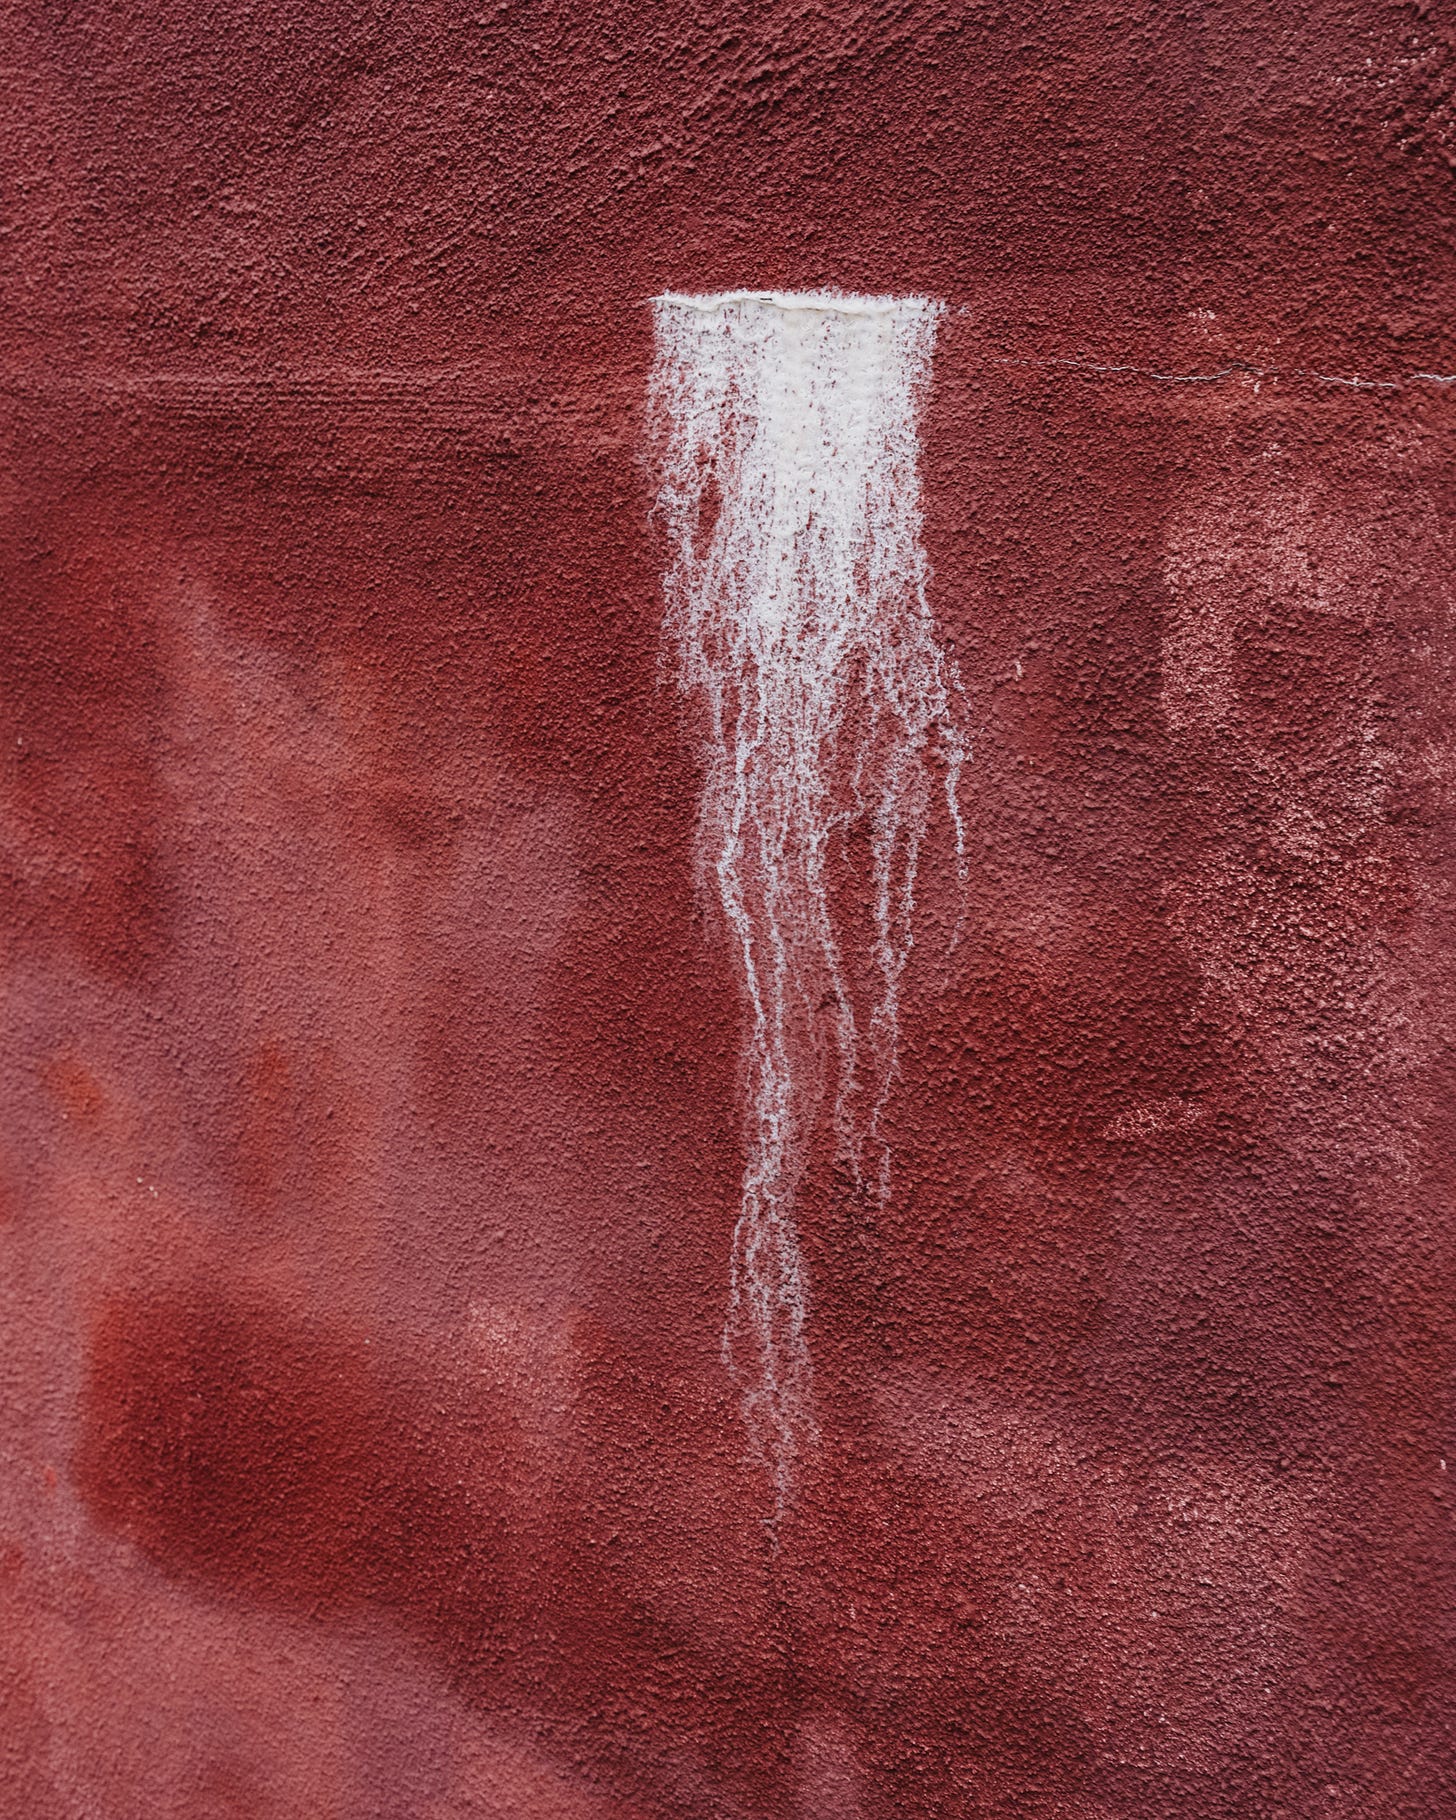 red wall with white splotch